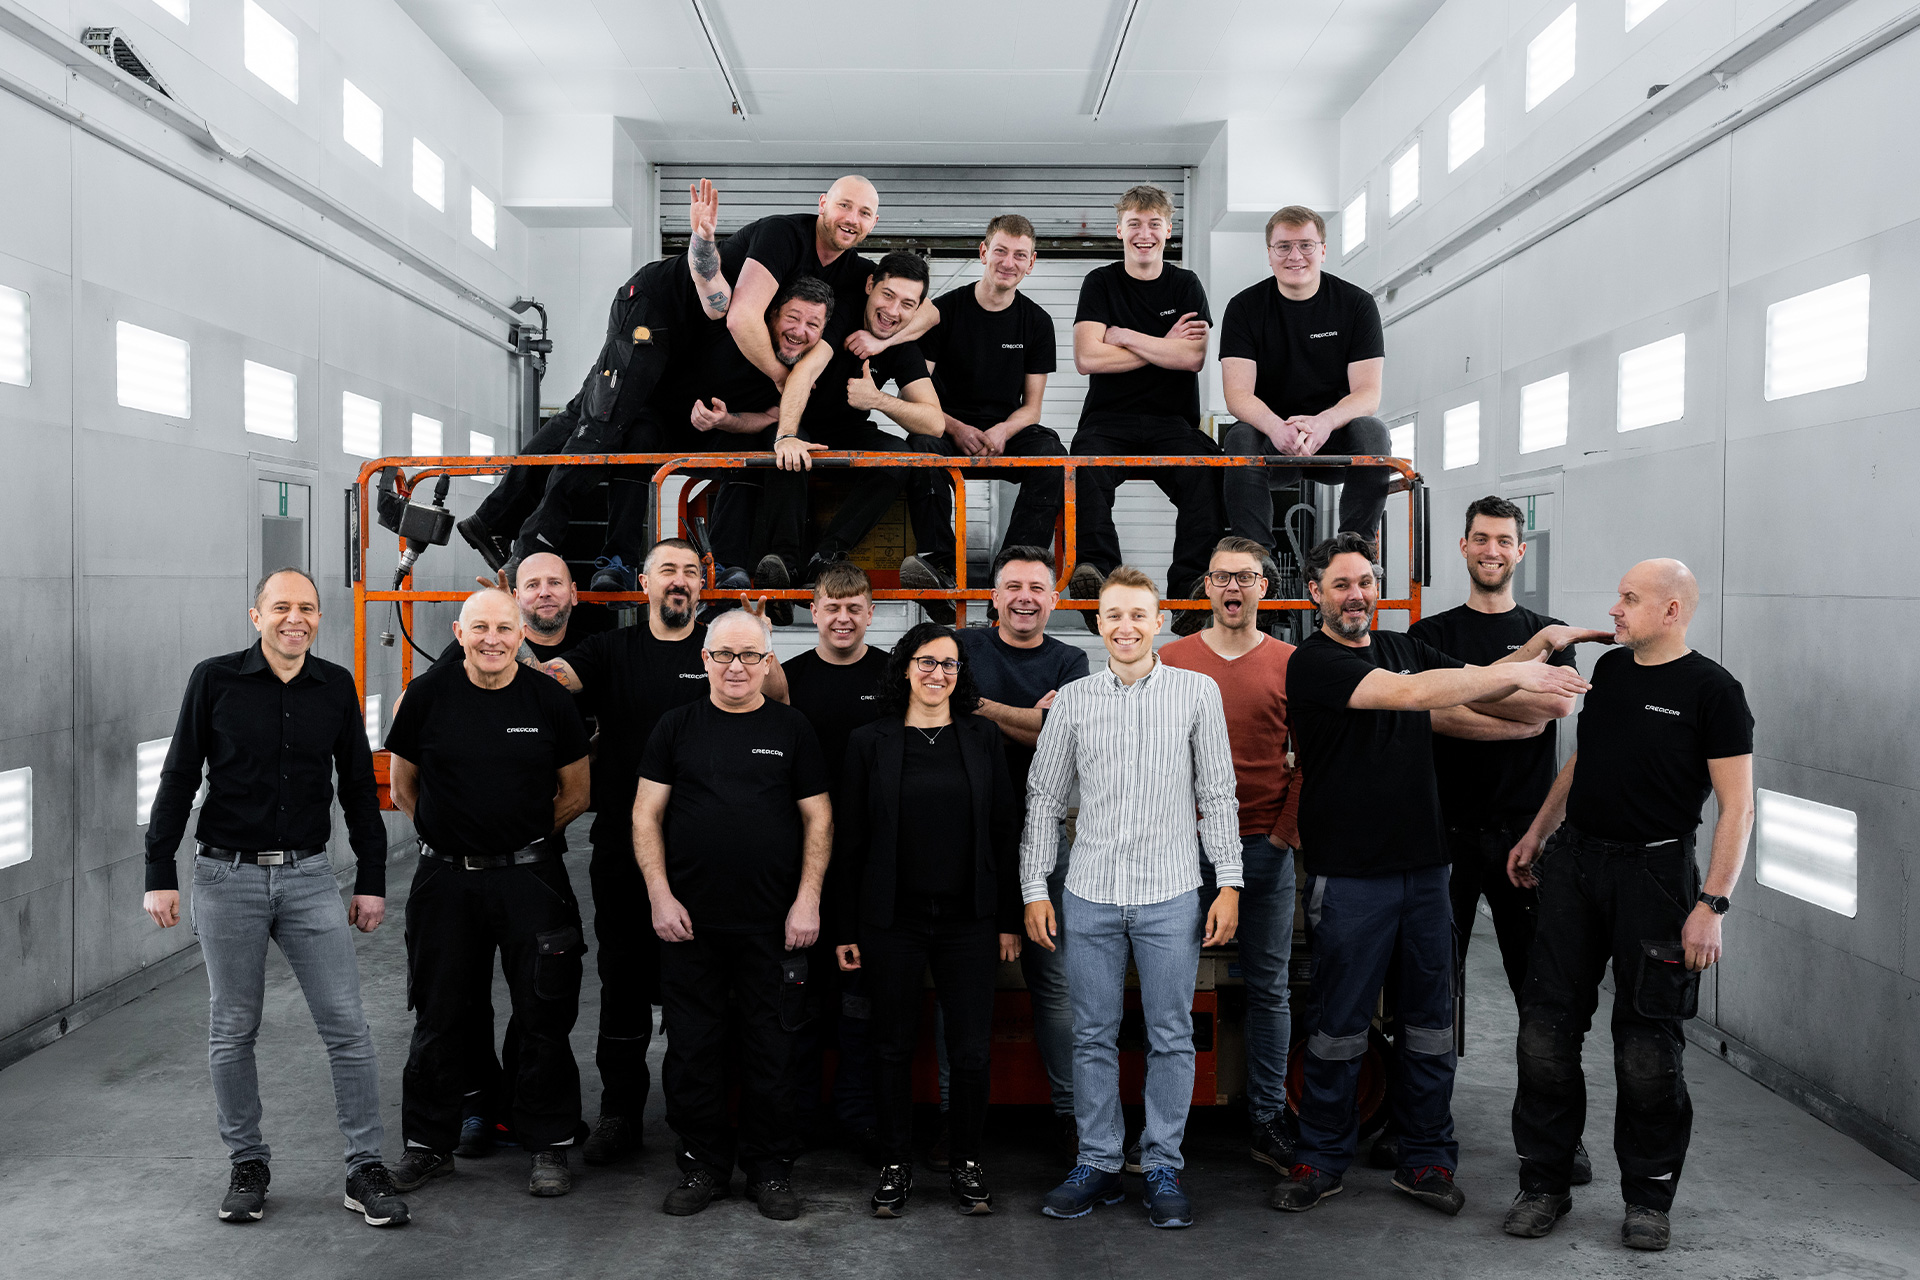 The complete Creacar team at their manufacturing and construction facility